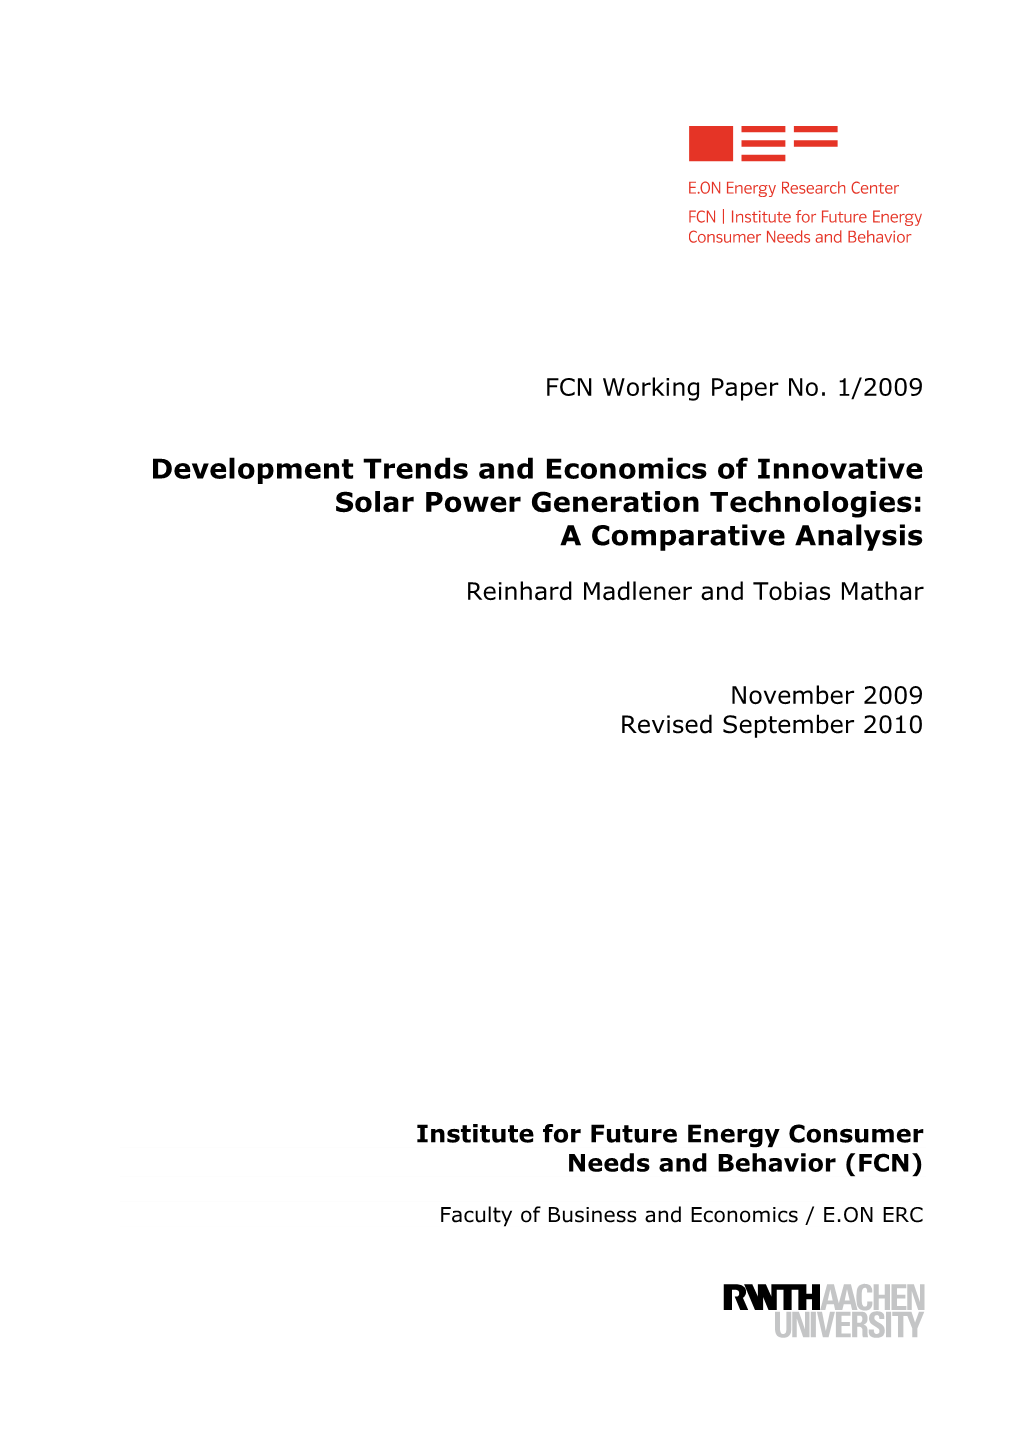 Development Trends and Economics of Innovative Solar Power Generation Technologies: a Comparative Analysis